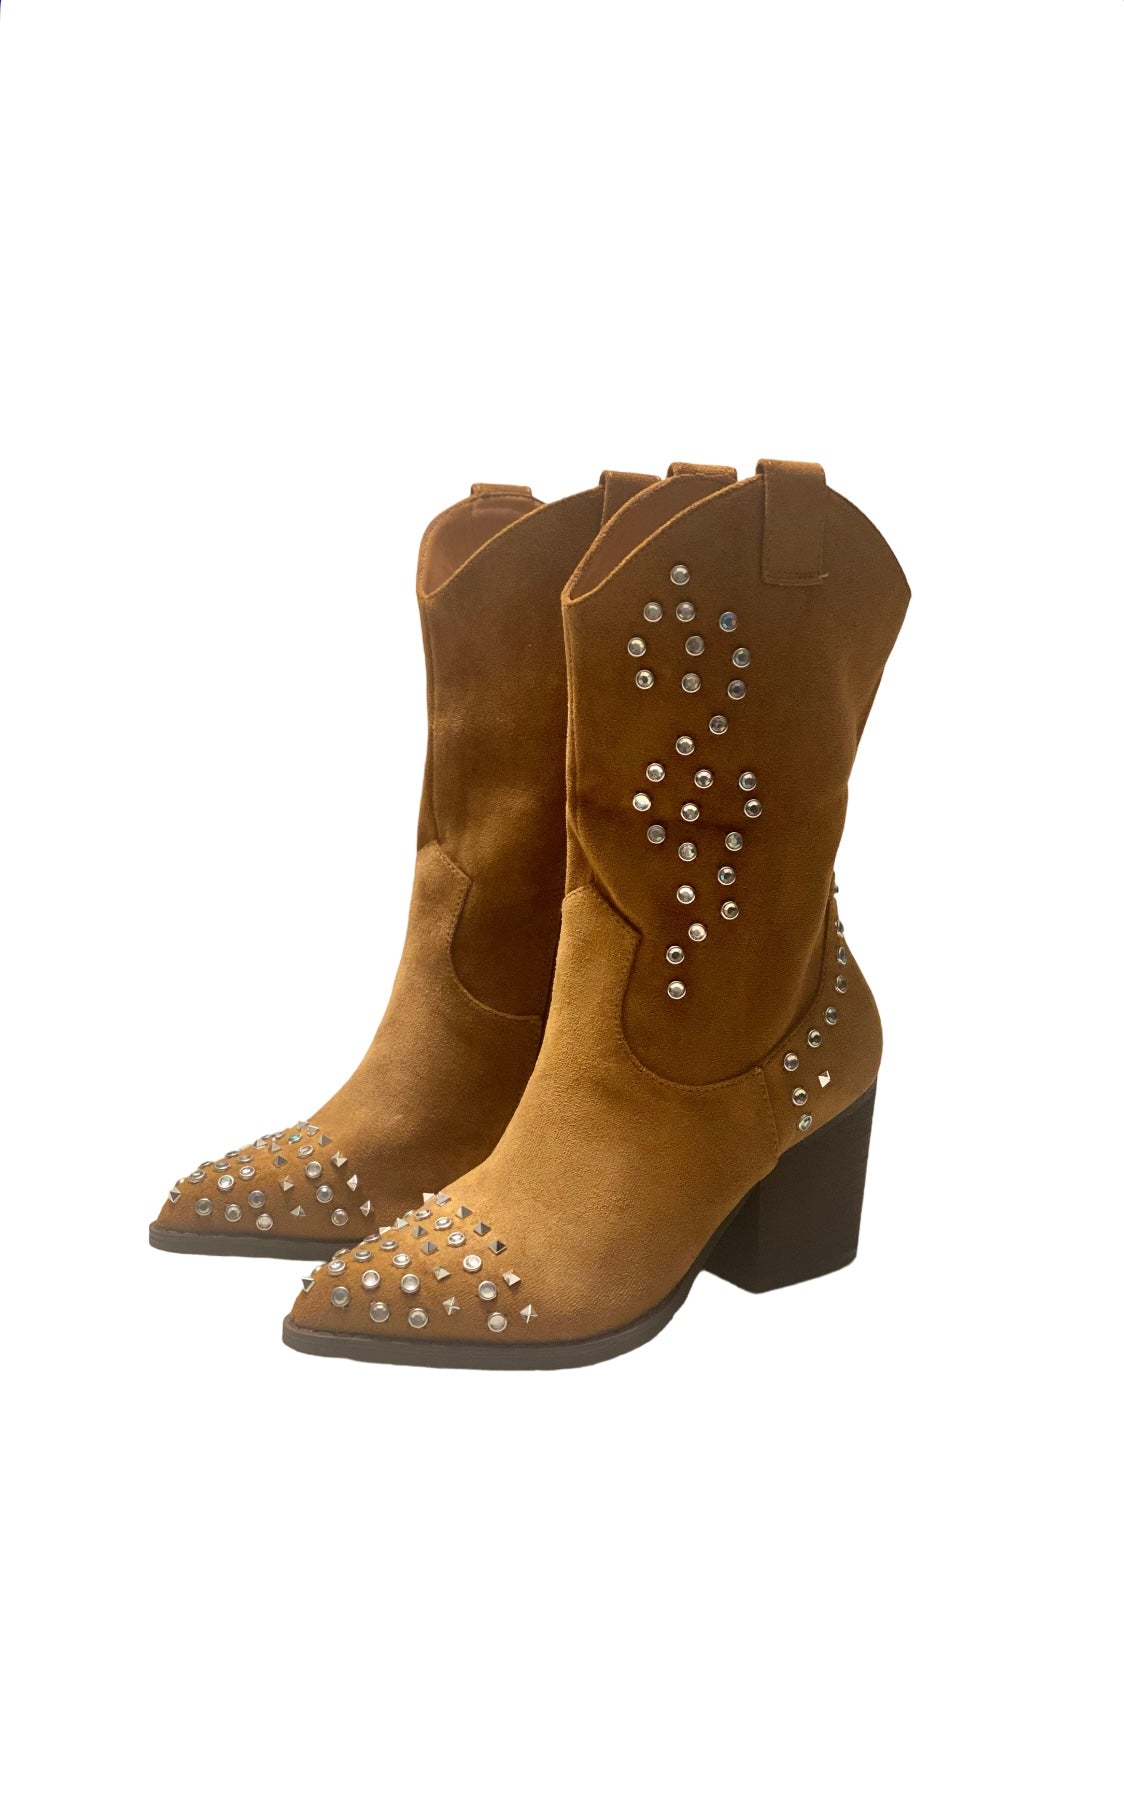 LEATHER COWBOY ANKLE BOOT WITH DETAILS